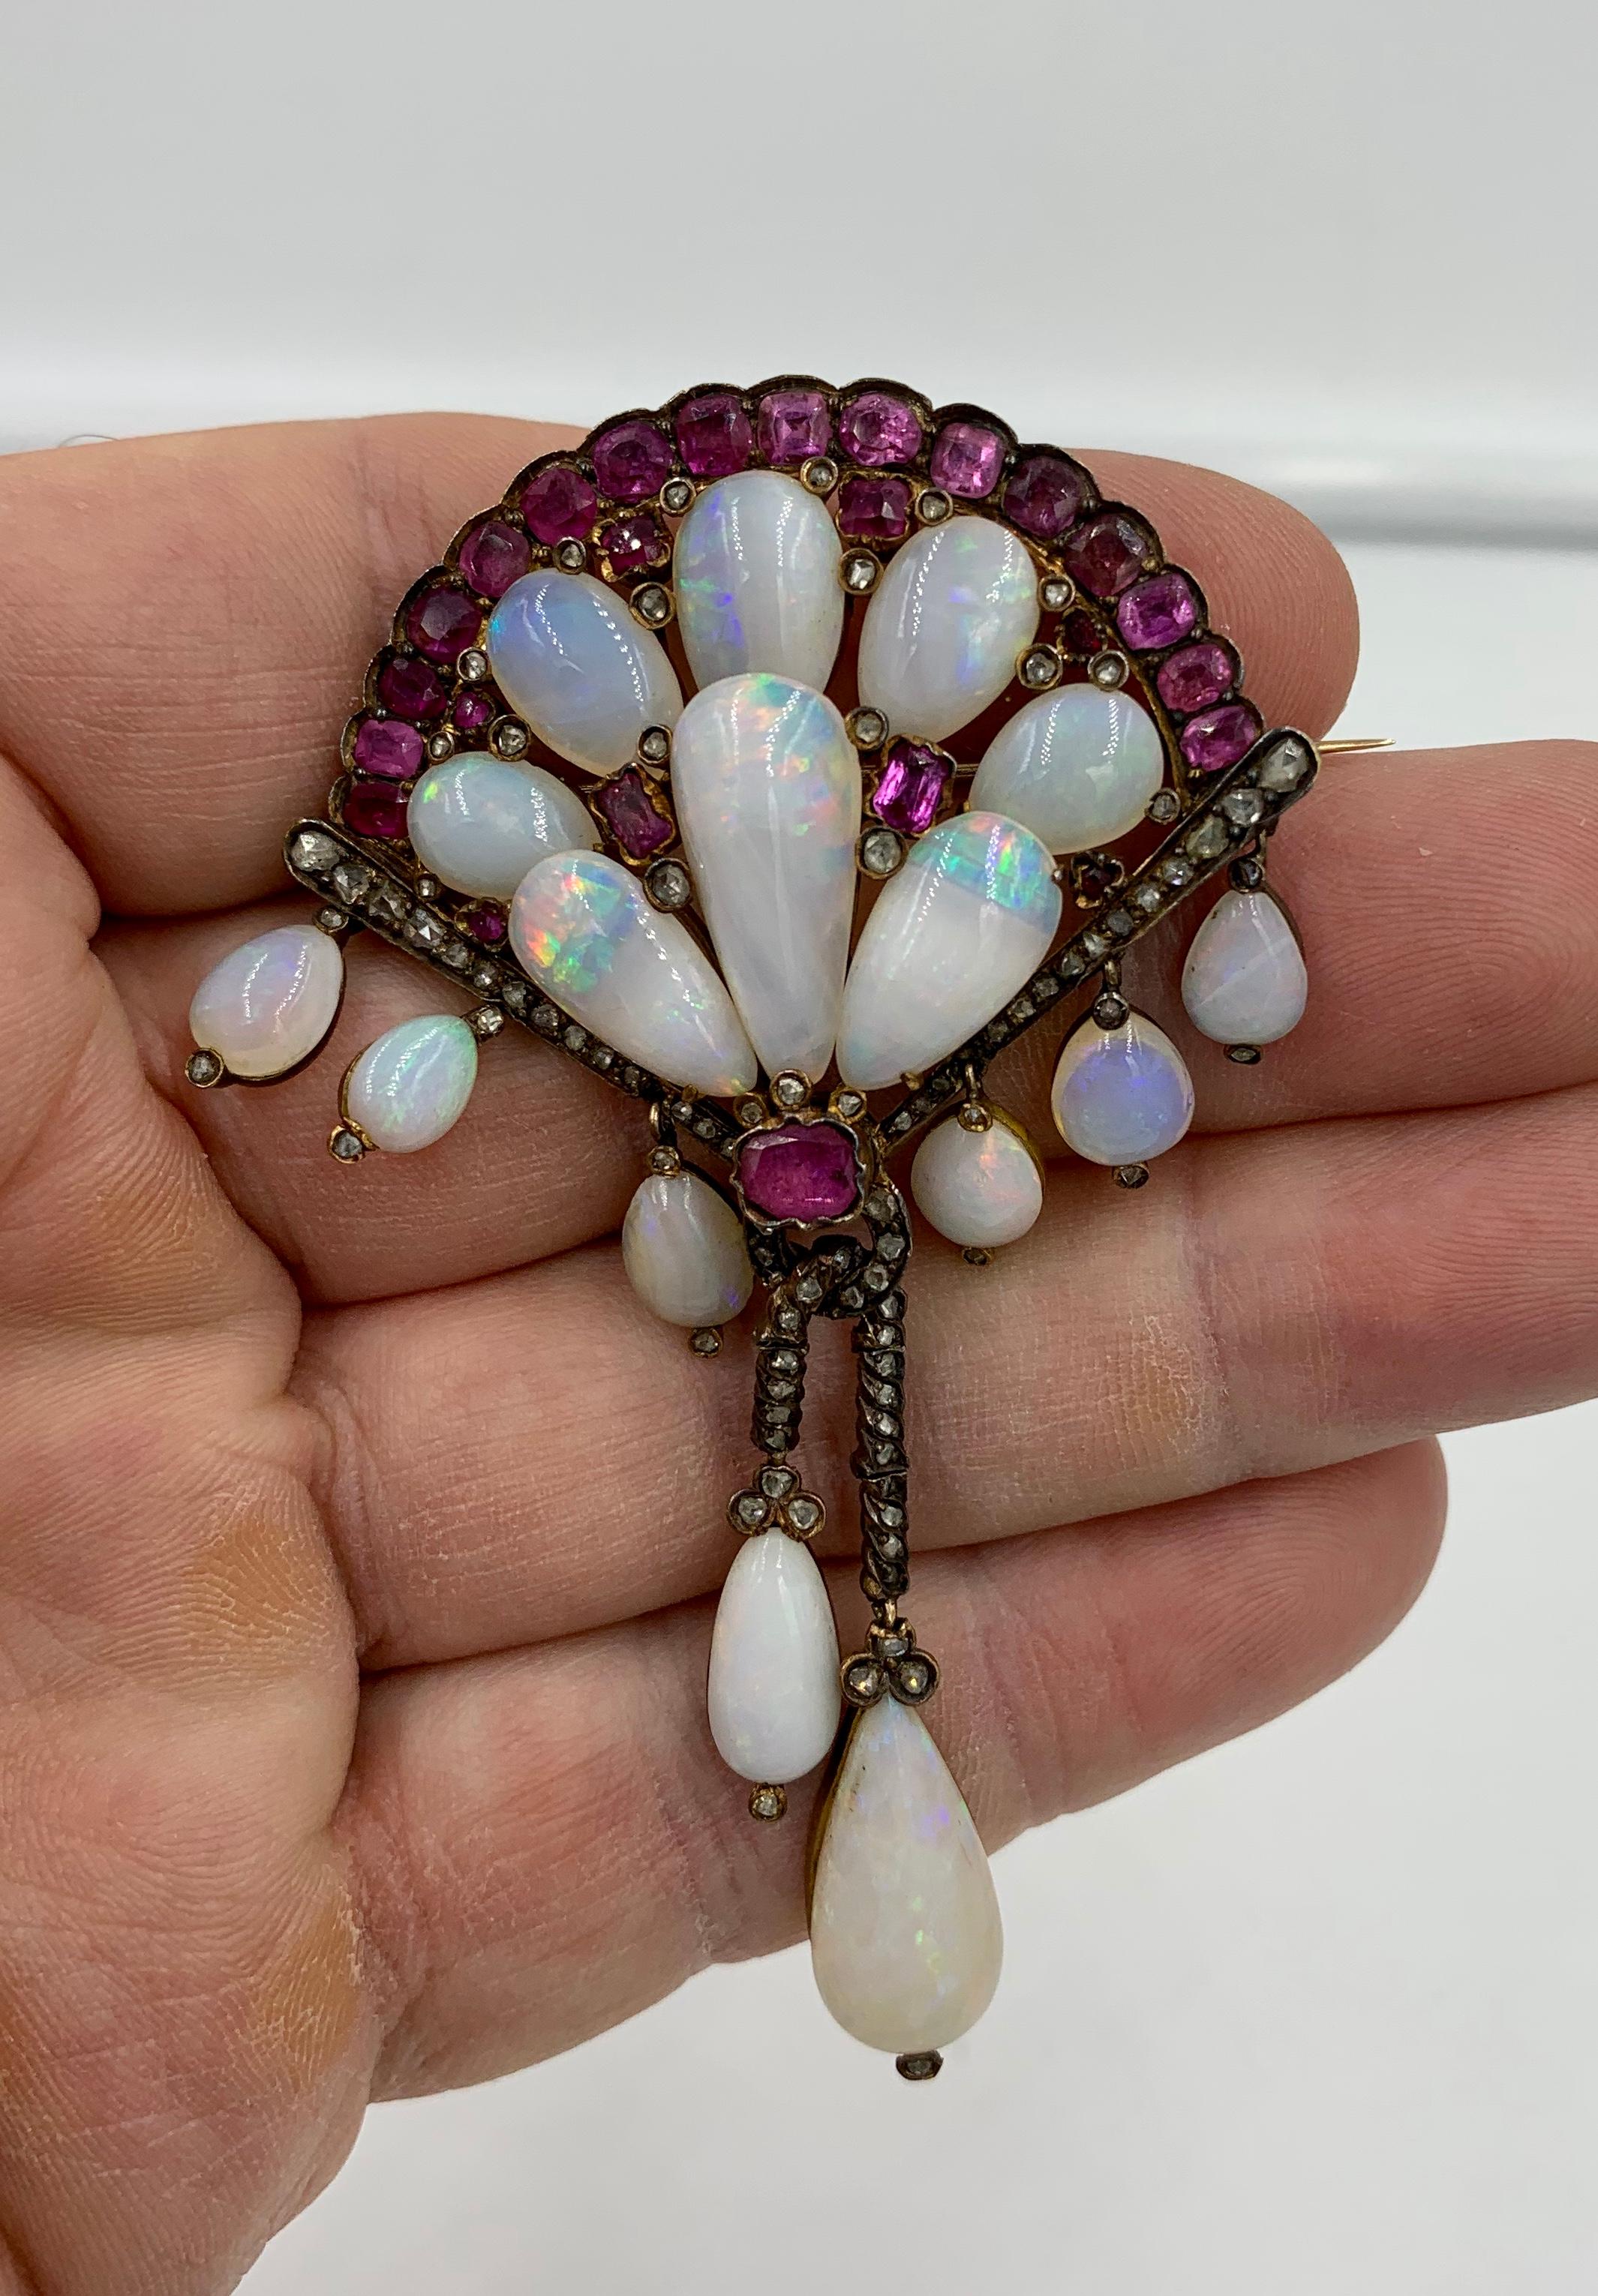 A spectacular antique fan motif brooch with 16 extraordinary pear shape cabochon cut Opals, 23 stunning Pink Sapphires, and 88 sparkling Rose Cut Diamonds. The Opals are just out of this world.  It is extremely rare to find antique jewels with opals